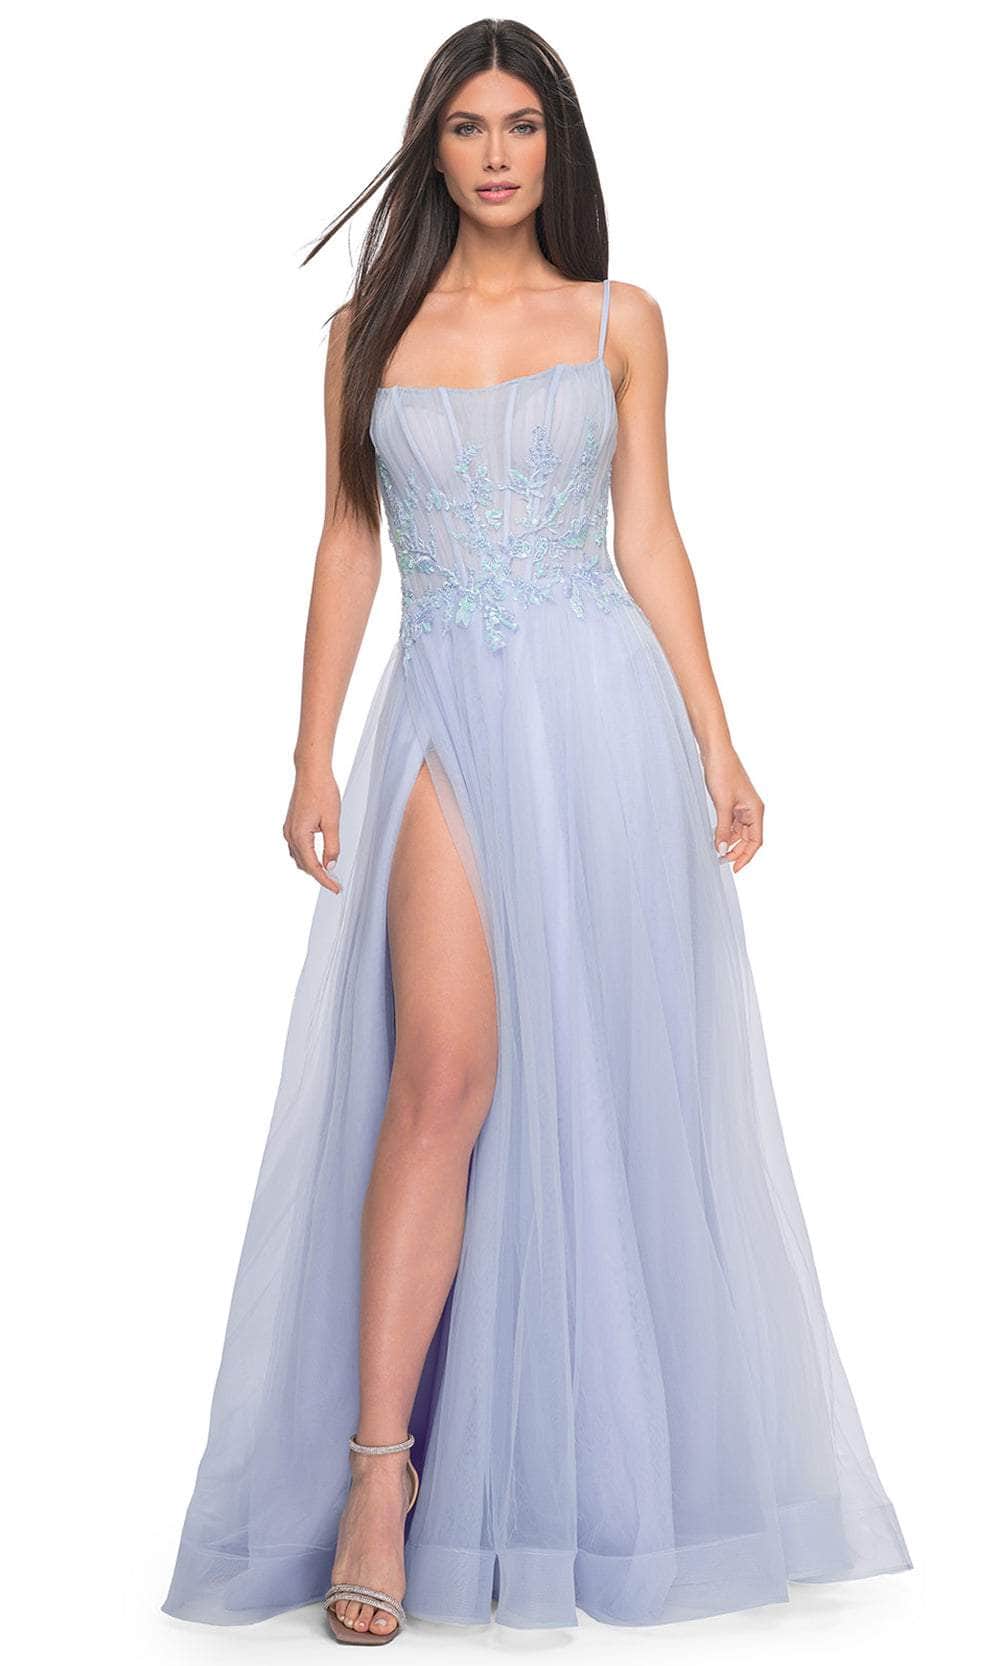 Image of La Femme 32293 - Embroidered Scoop Neck Prom Gown